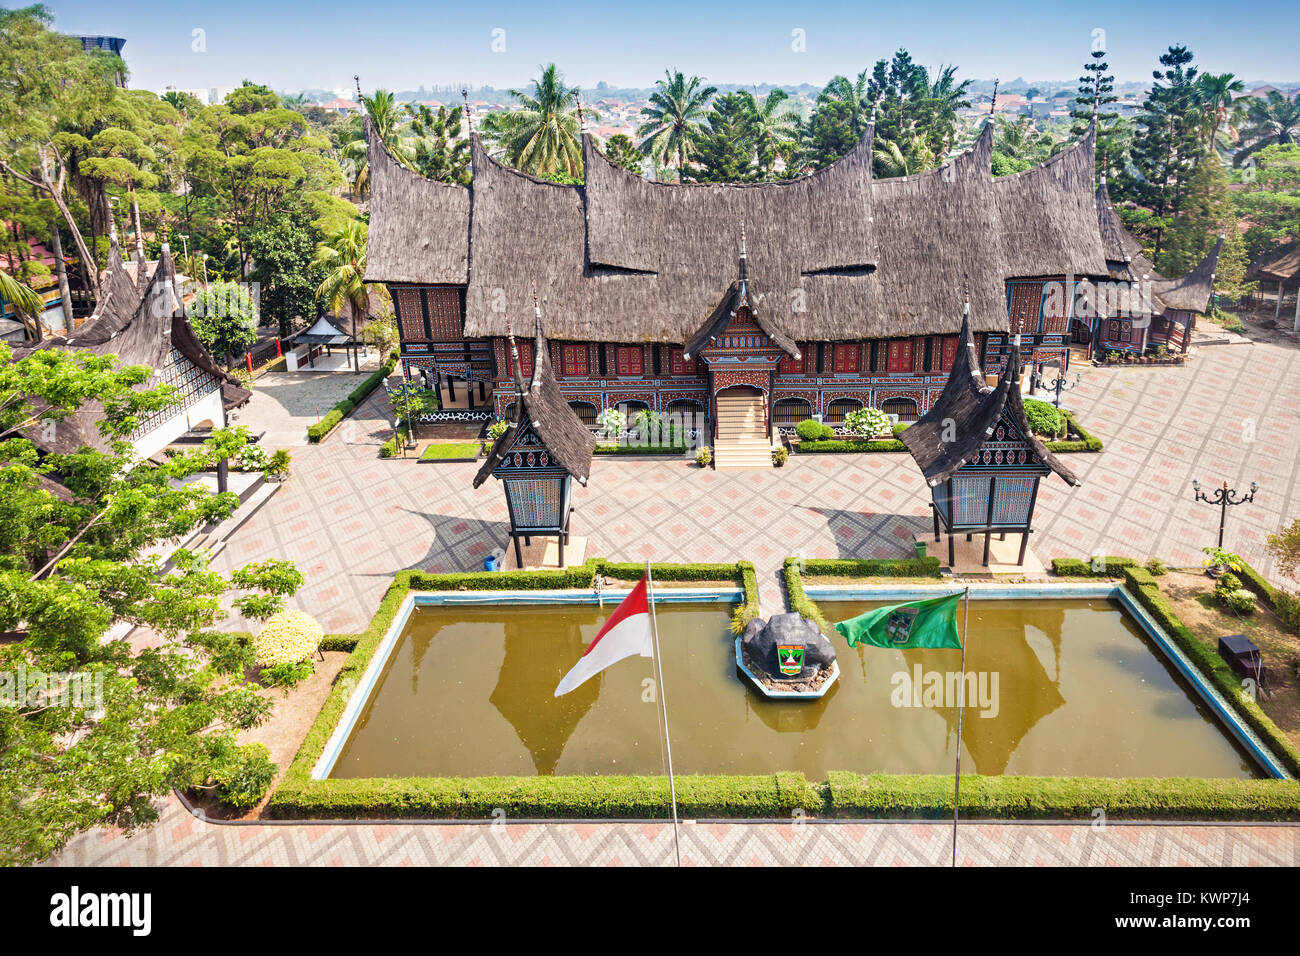 Taman Mini Indonesia Indah is a culture based recreational area located in East Jakarta Stock Photo